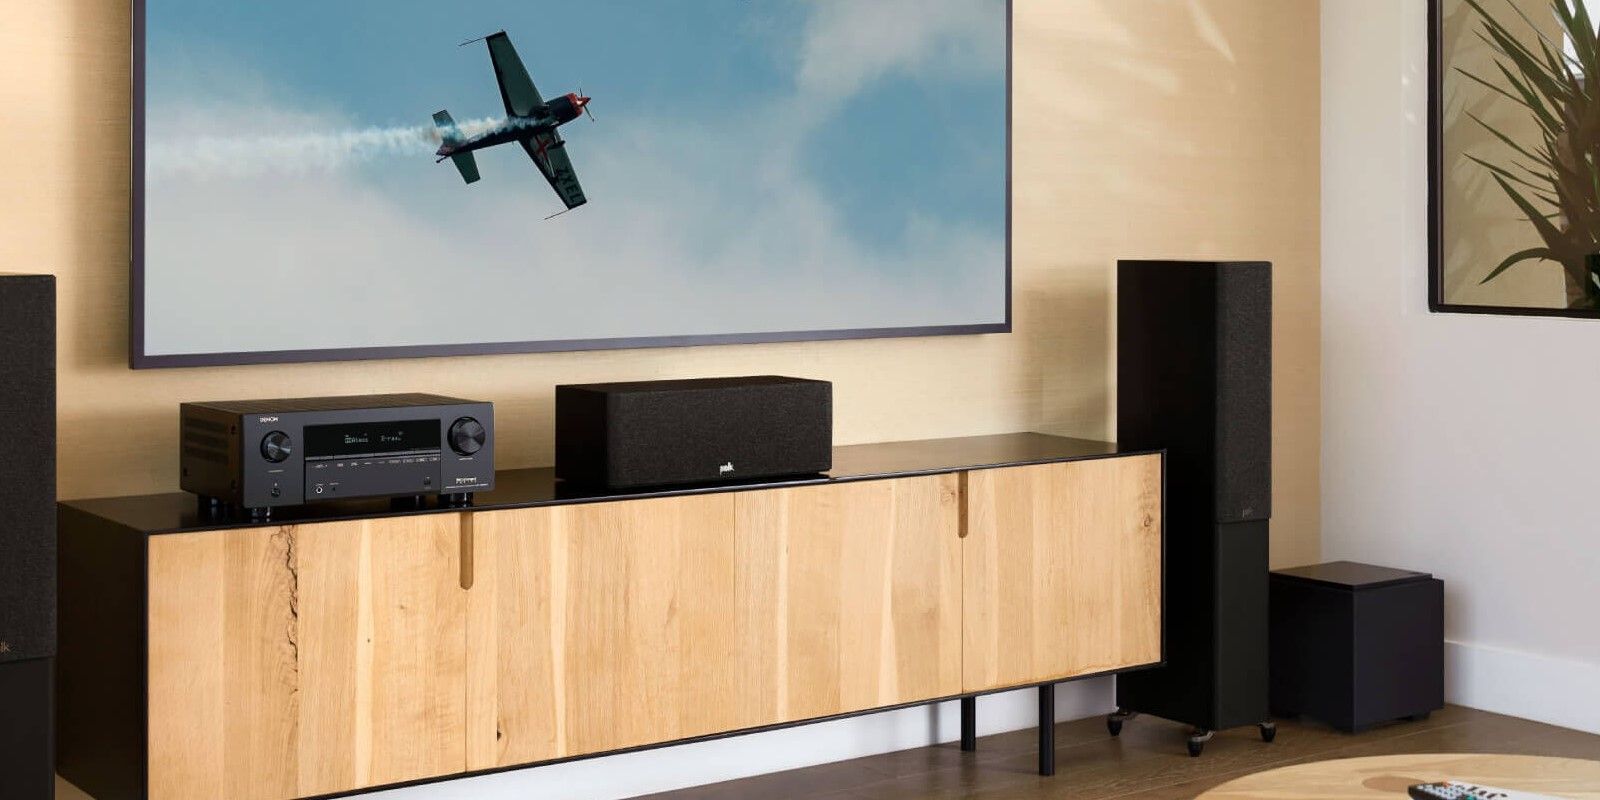 List Image of the Denon AVR-X2000H AV Amplifier in a Hi-Fi system setup in a living room on a wooden cabinet below a widescreen TV 